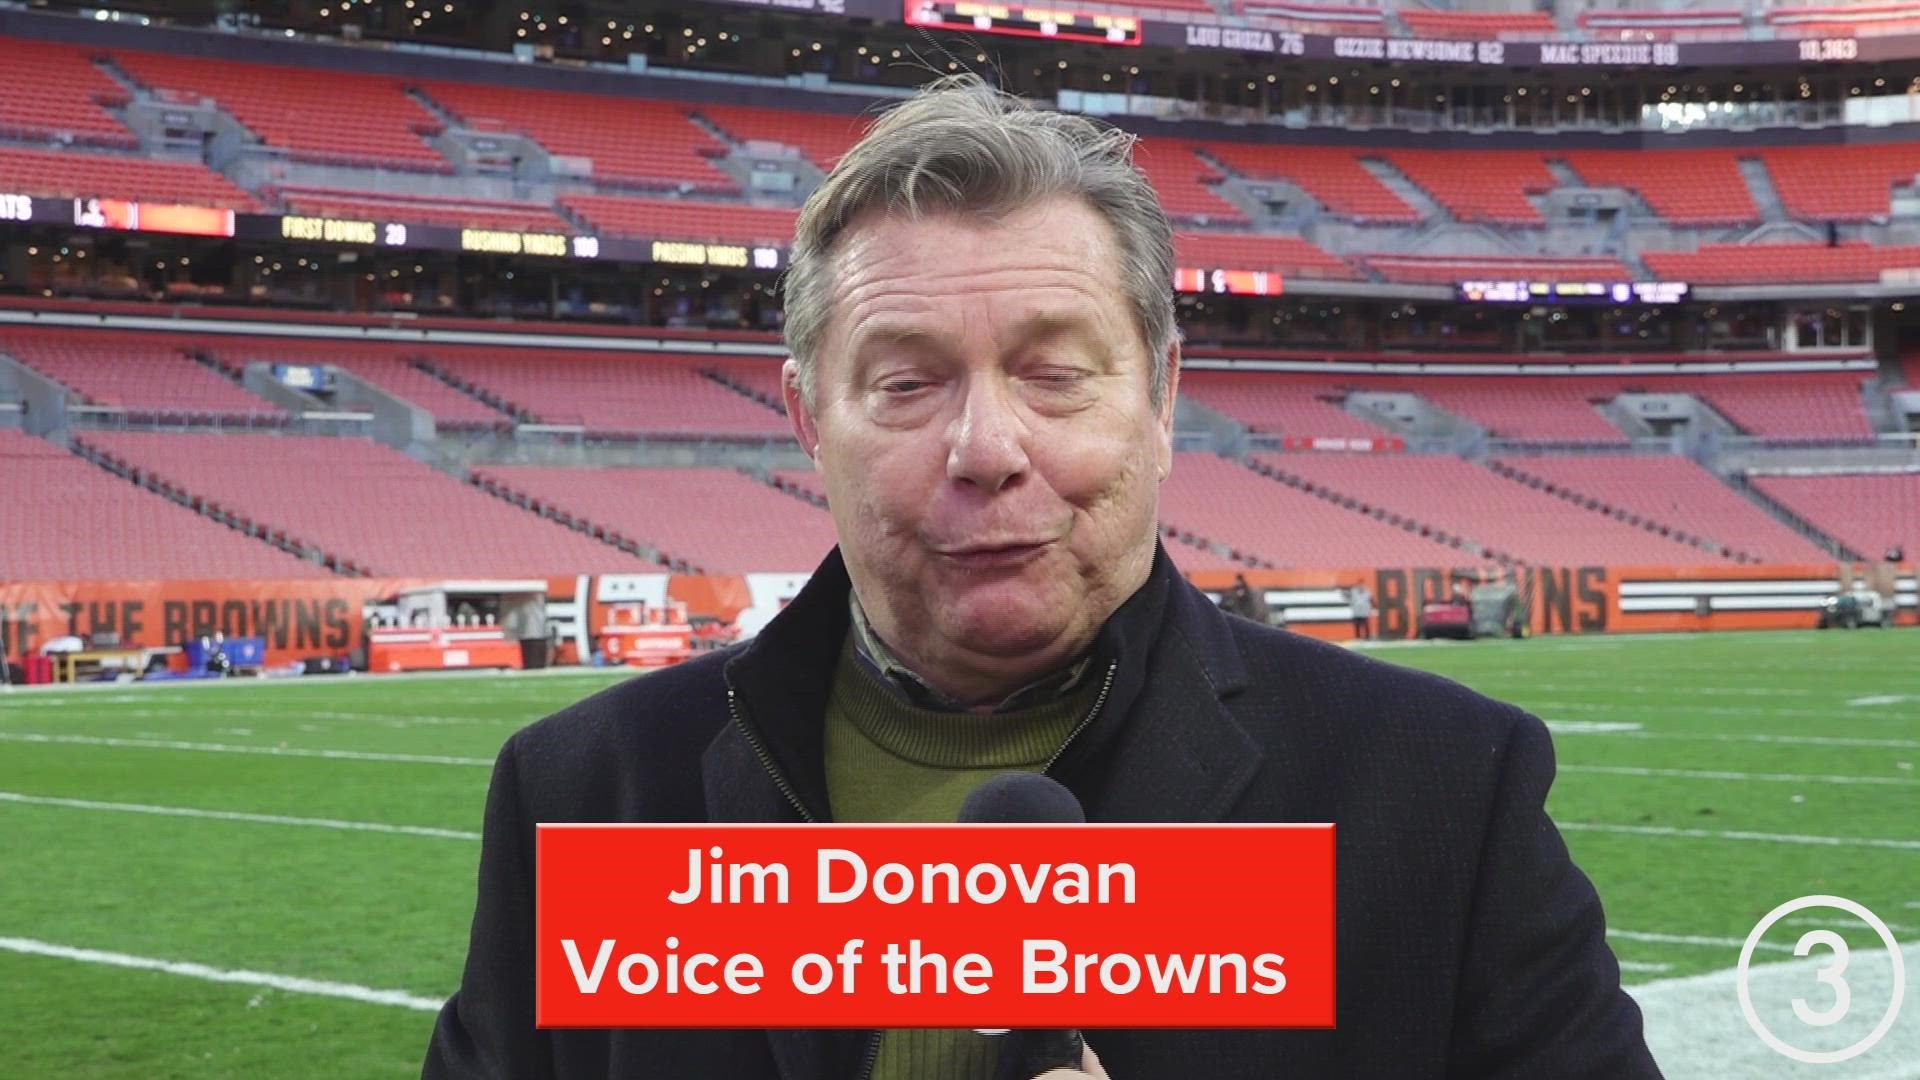 Voice of the Browns Jim Donovan recaps the Browns huge win over the Ravens.